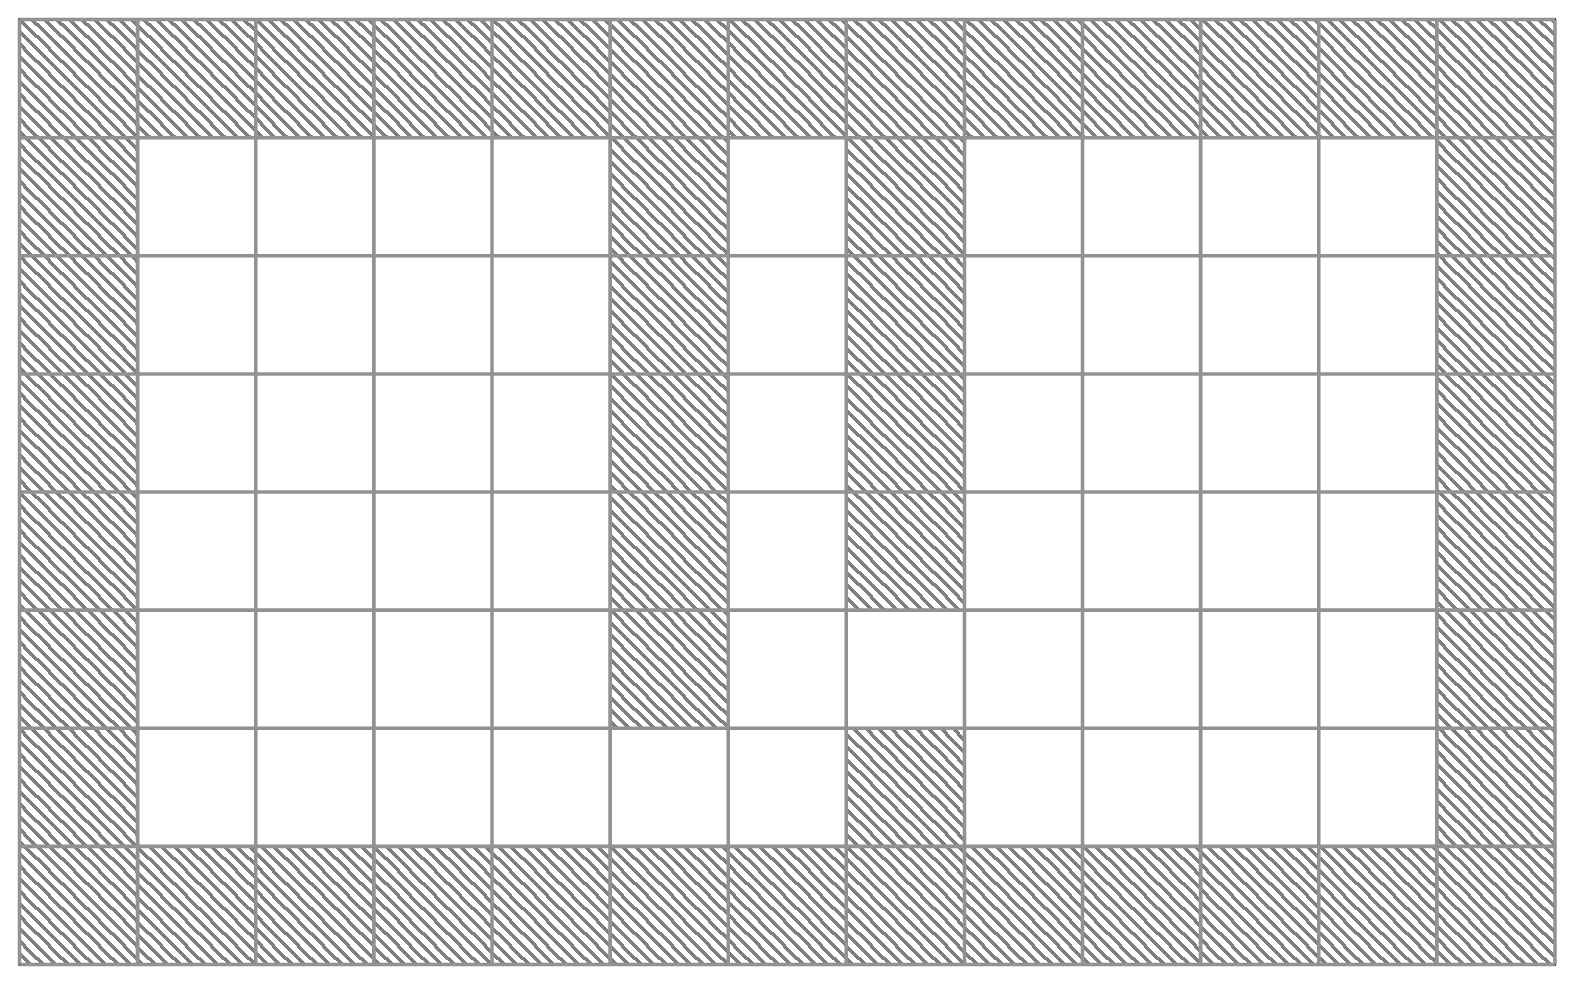 A rectangular grid shows solid shaded squares indicating the position of walls